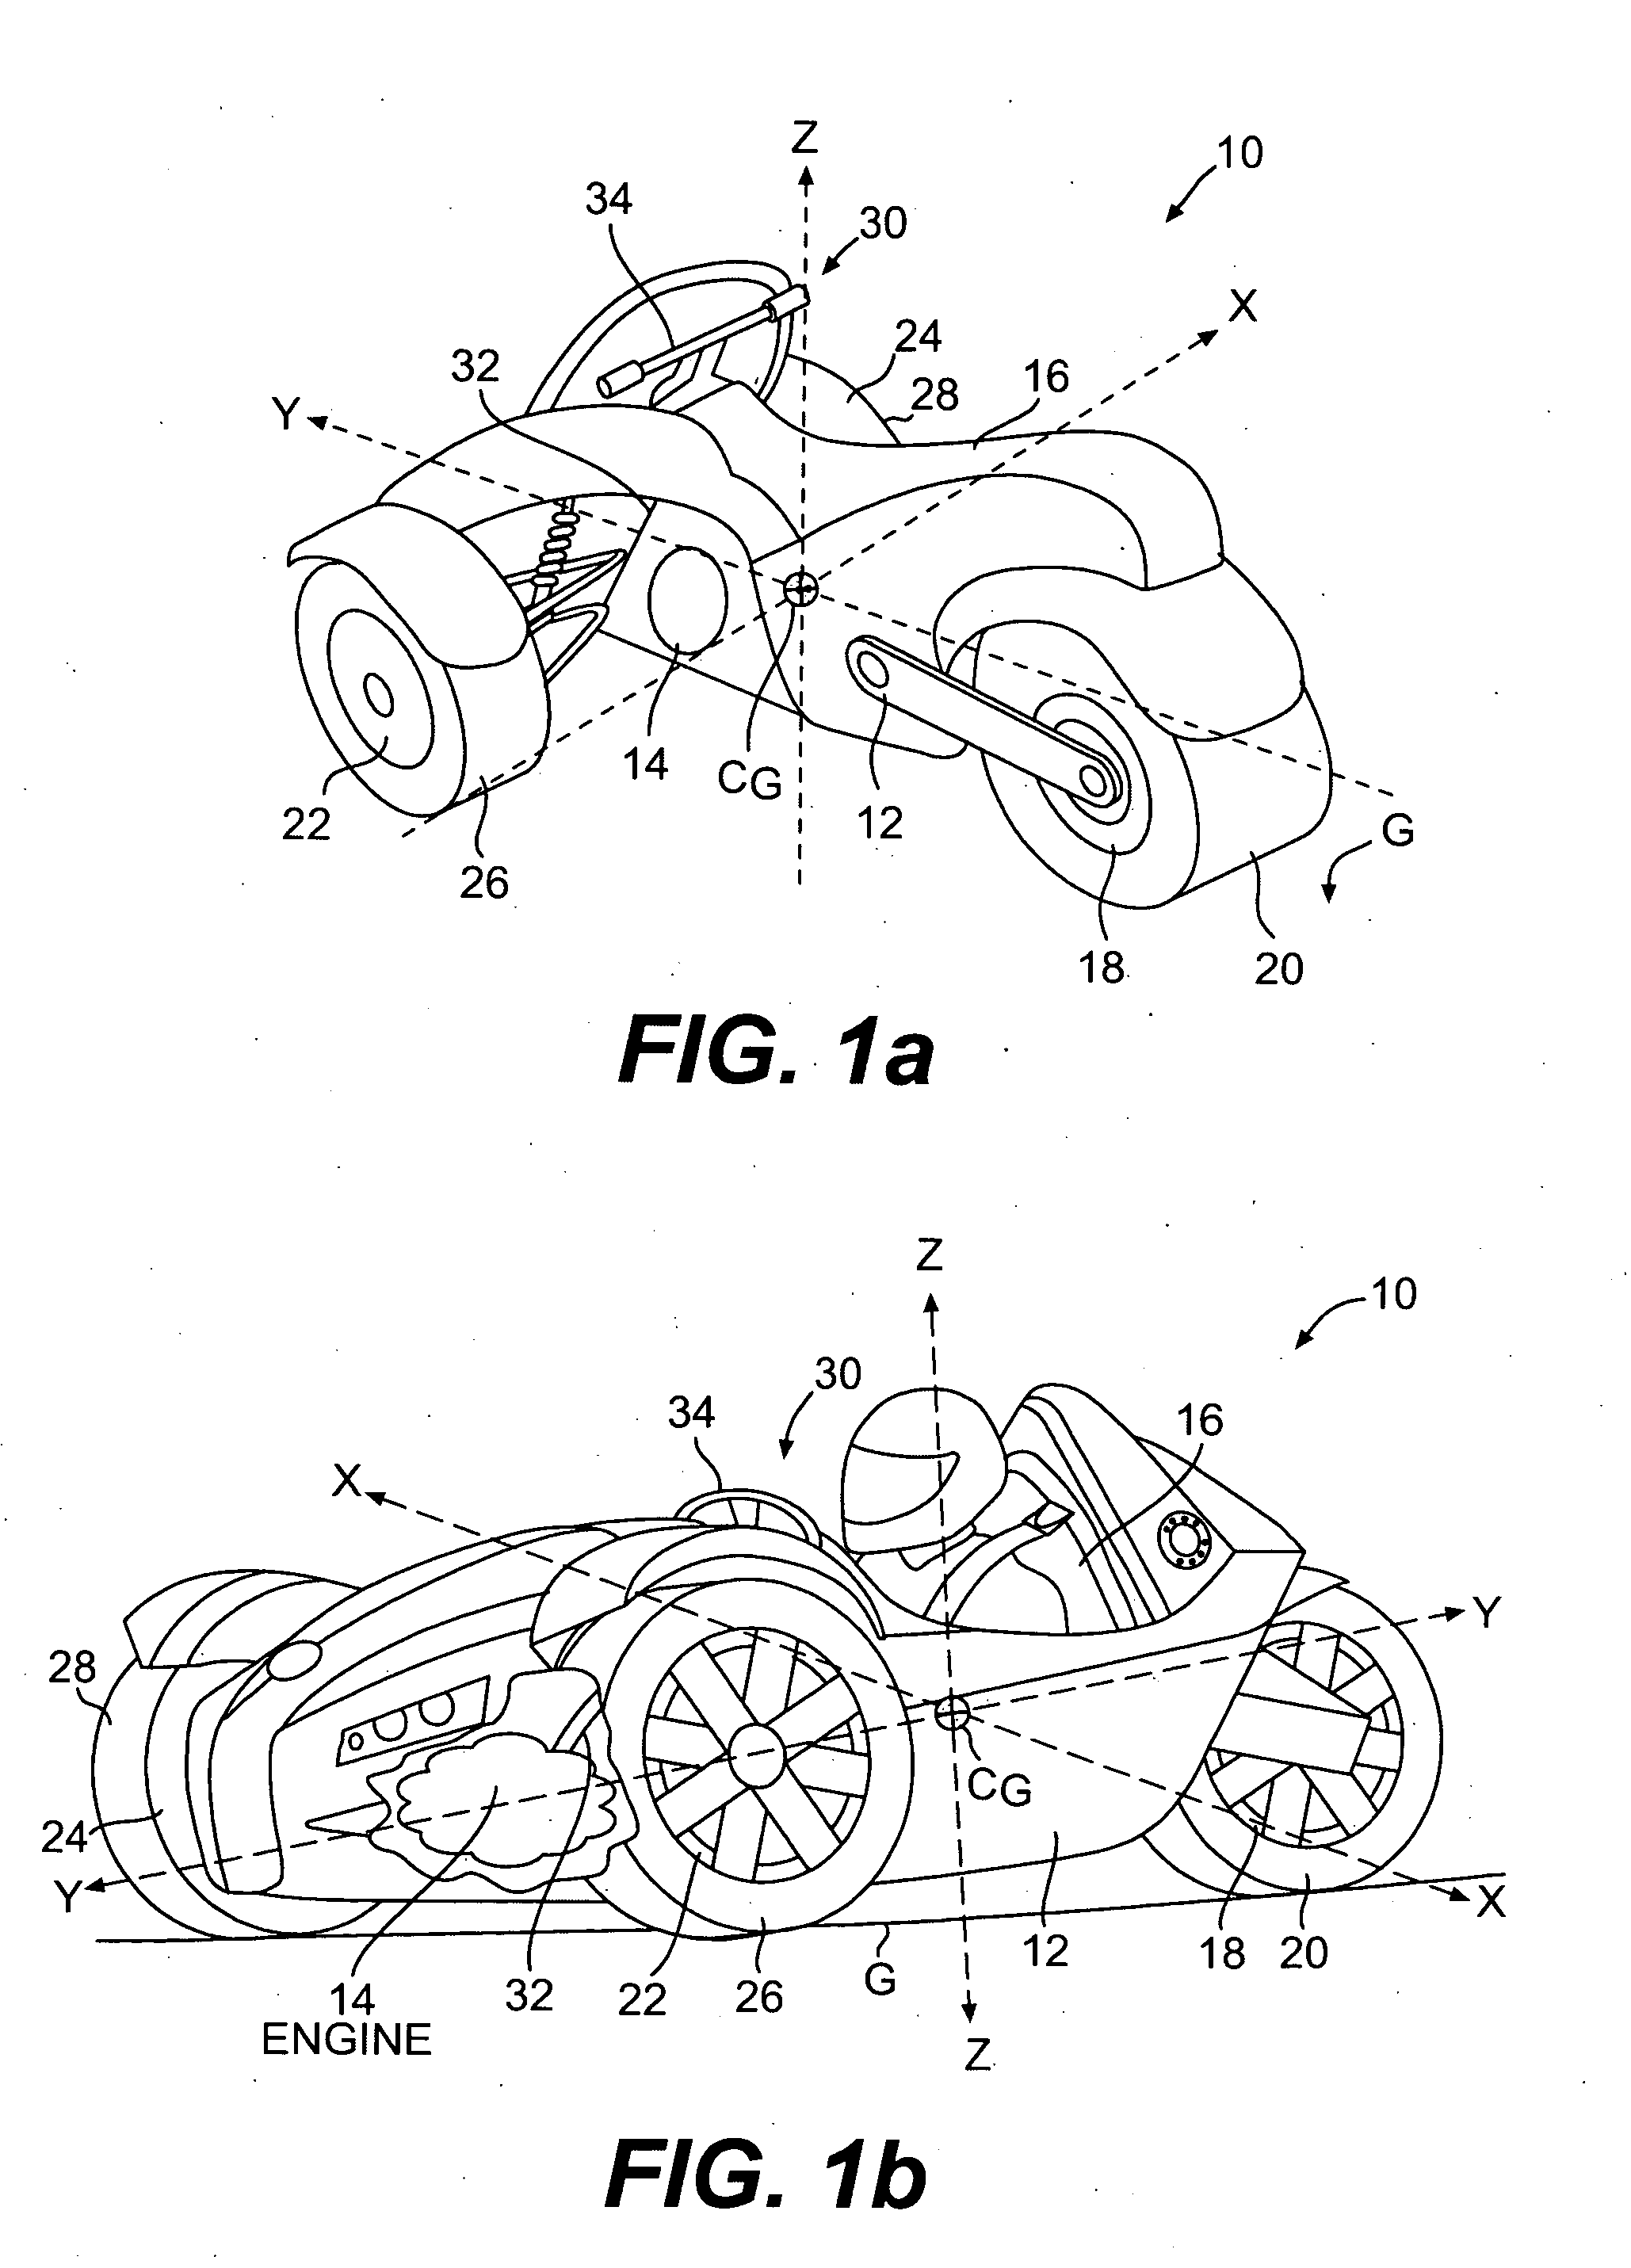 Electronic stability system on a three-wheeled vehicle